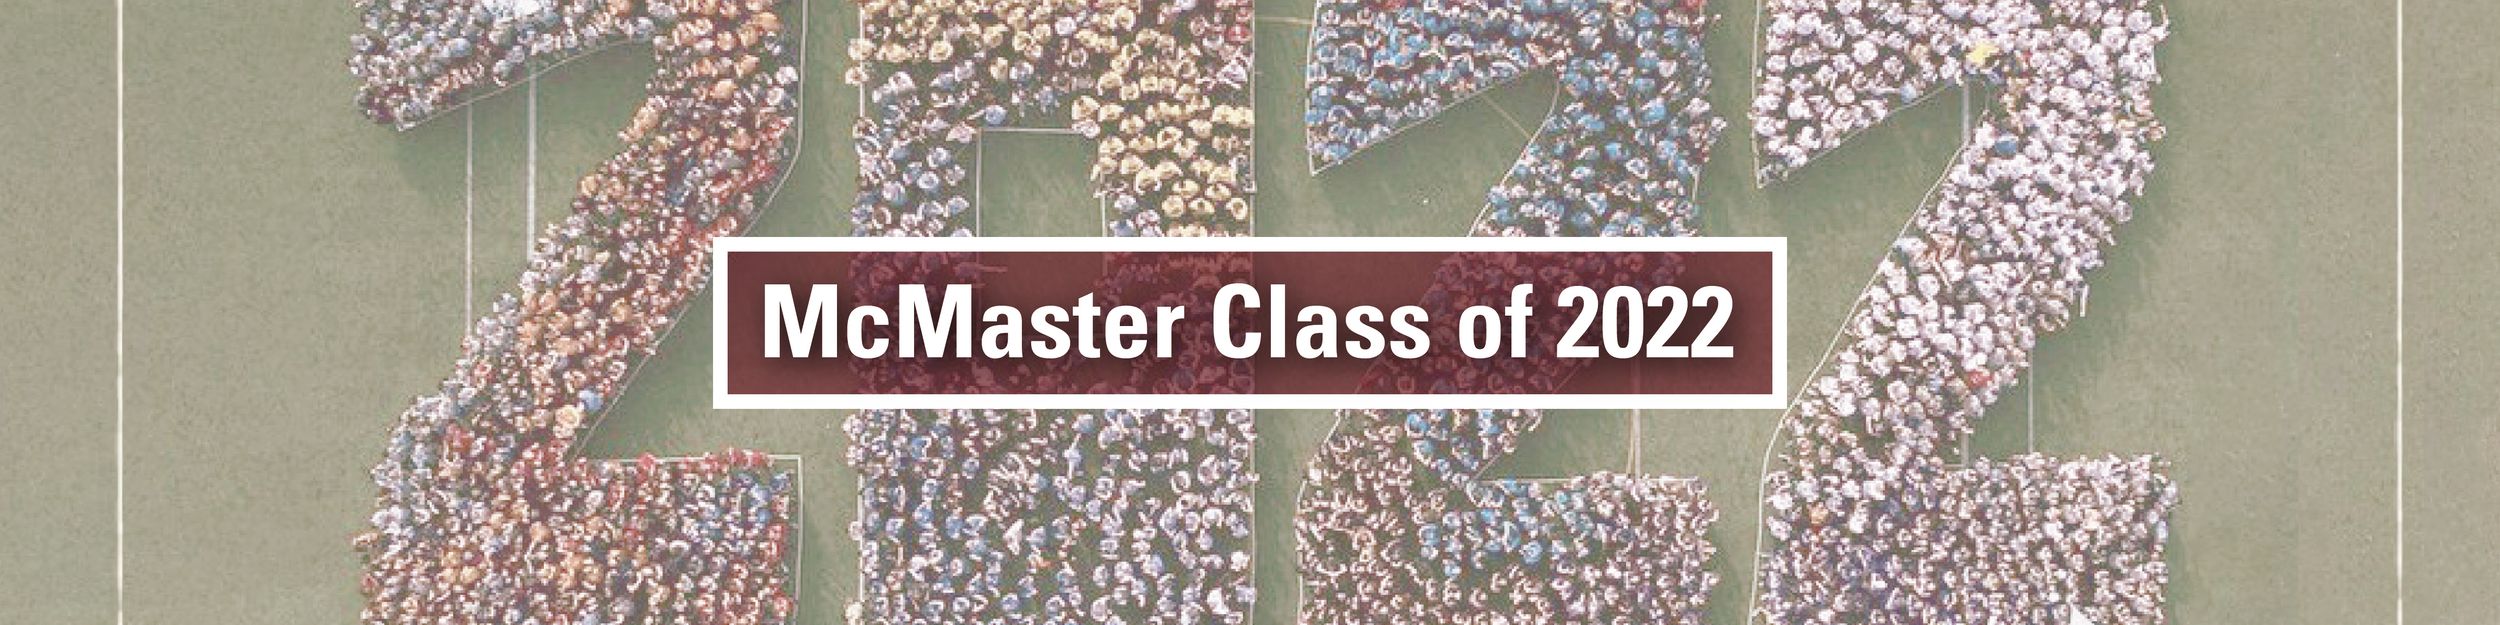 McMaster Class of 2022